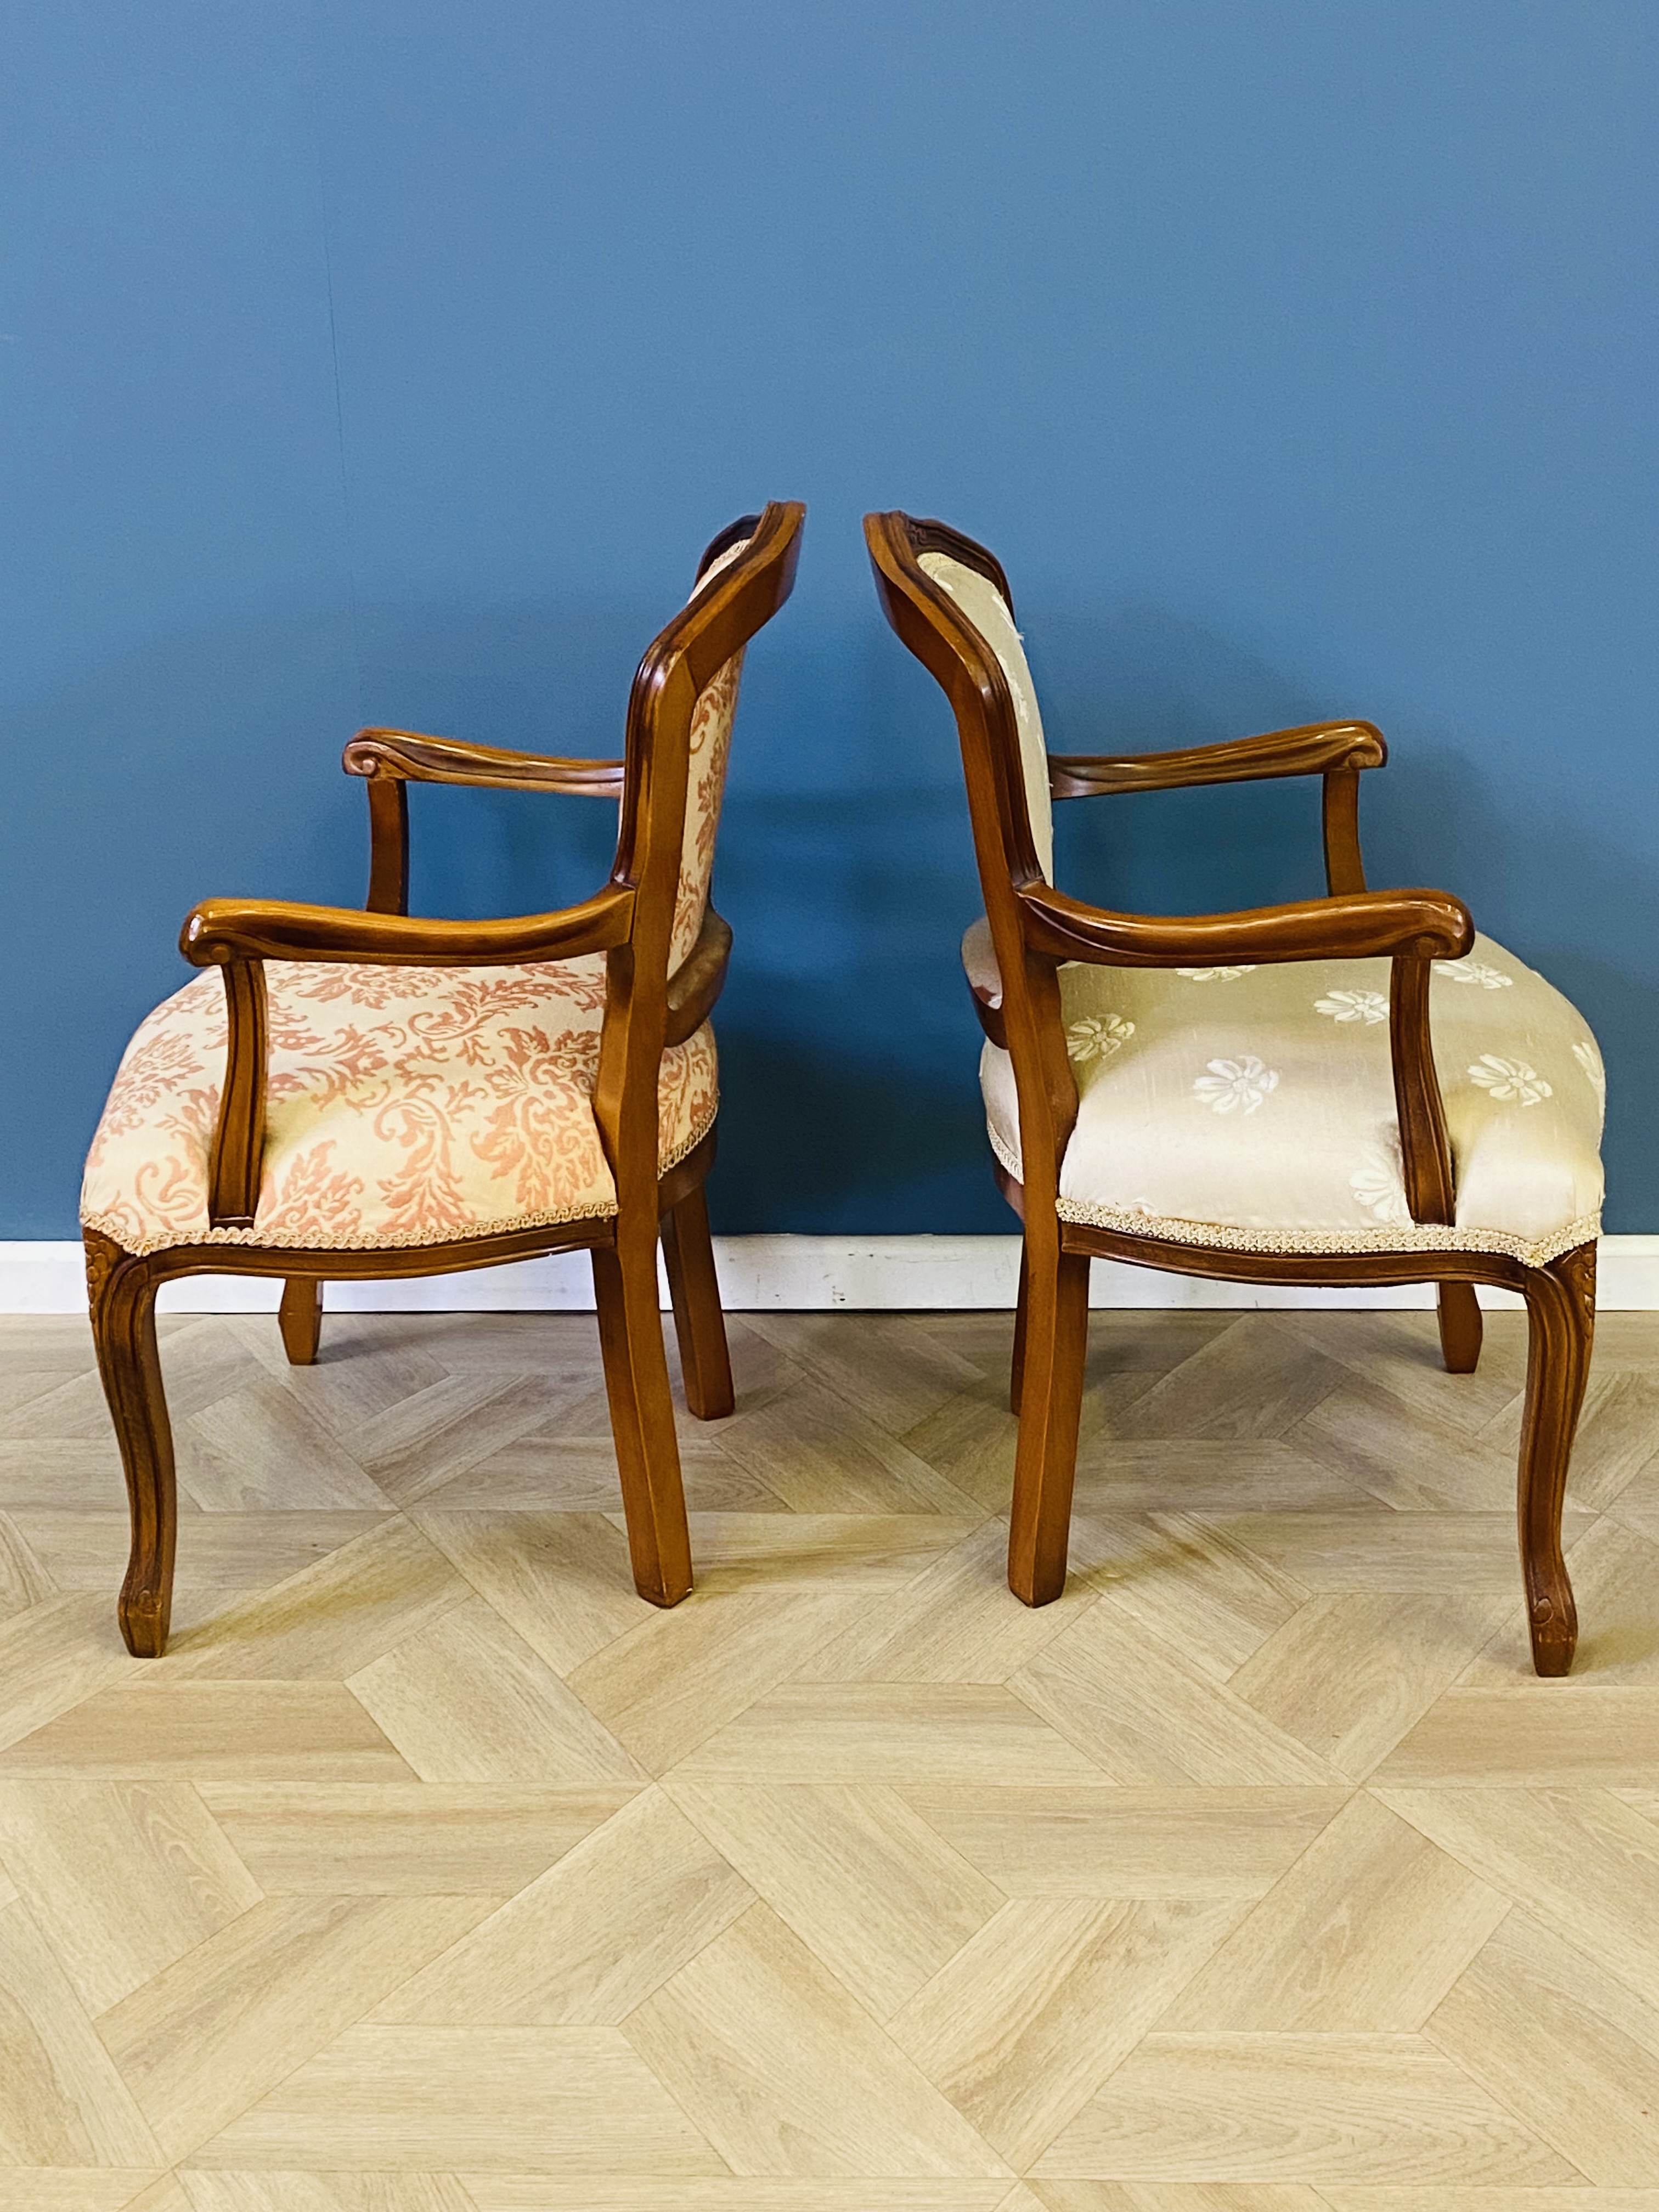 Pair of reproduction French style upholstered elbow chairs - Image 5 of 7